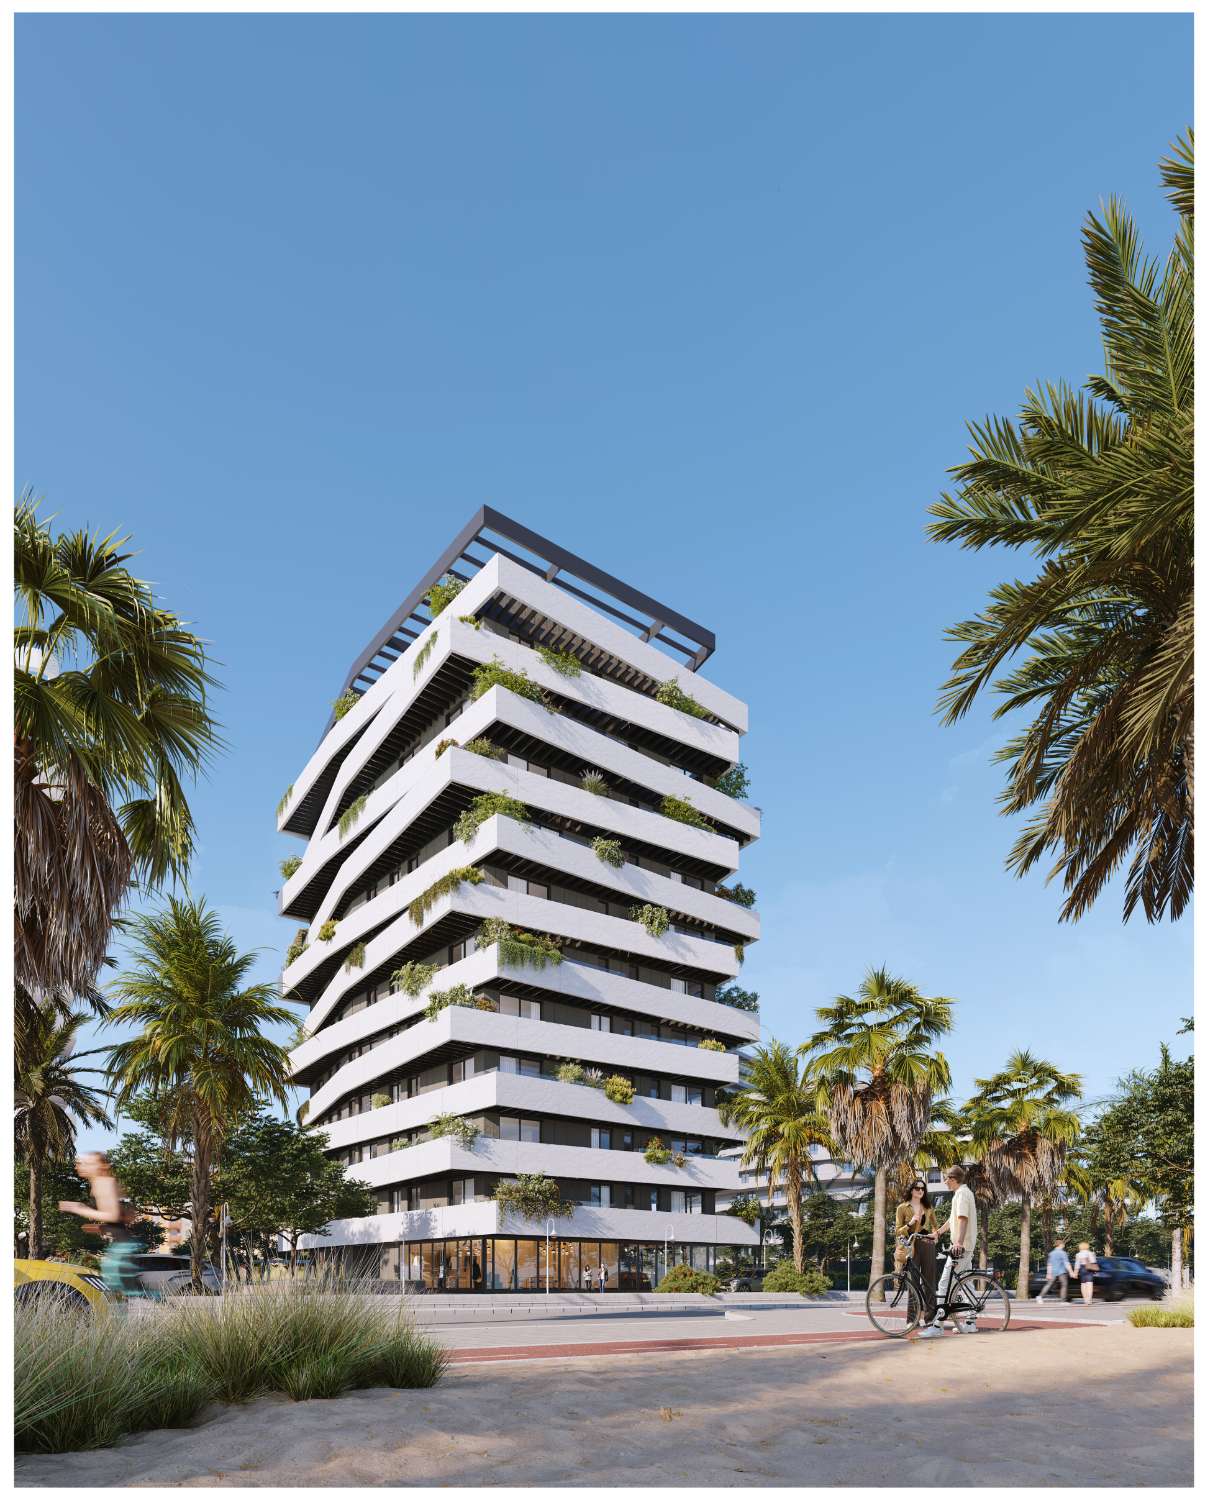 BRAND NEW LUXURY 2 BEDROOM DUPLEX WITH SEA VIEWS LAST 2 UNITS! From €1,845,000